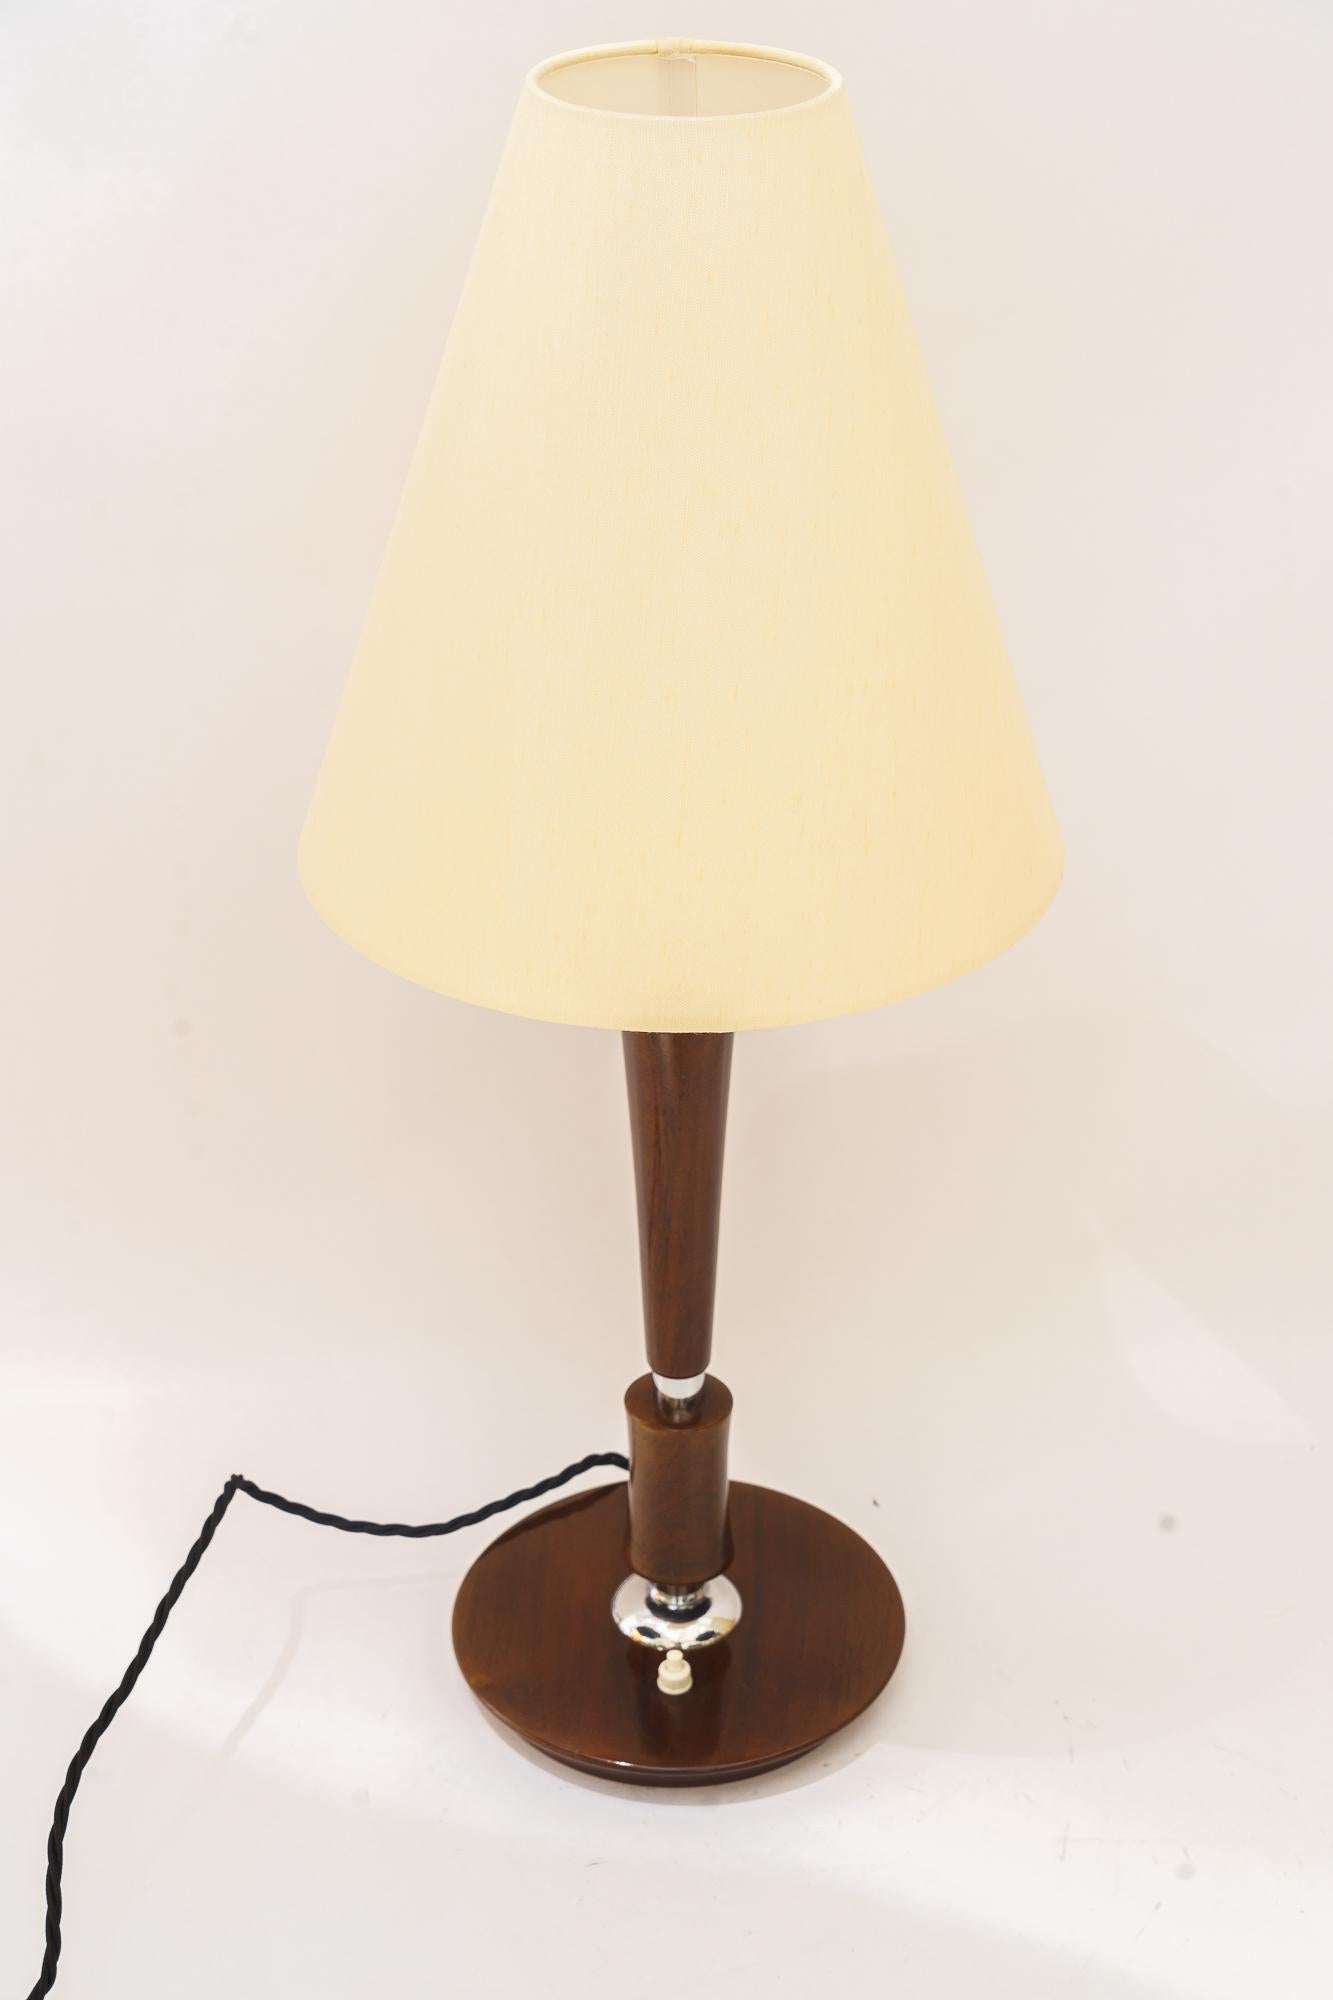 Art Deco wood table lamp vienna around 1930s
The fabric shade is replaced (New) 
The light is original condition


